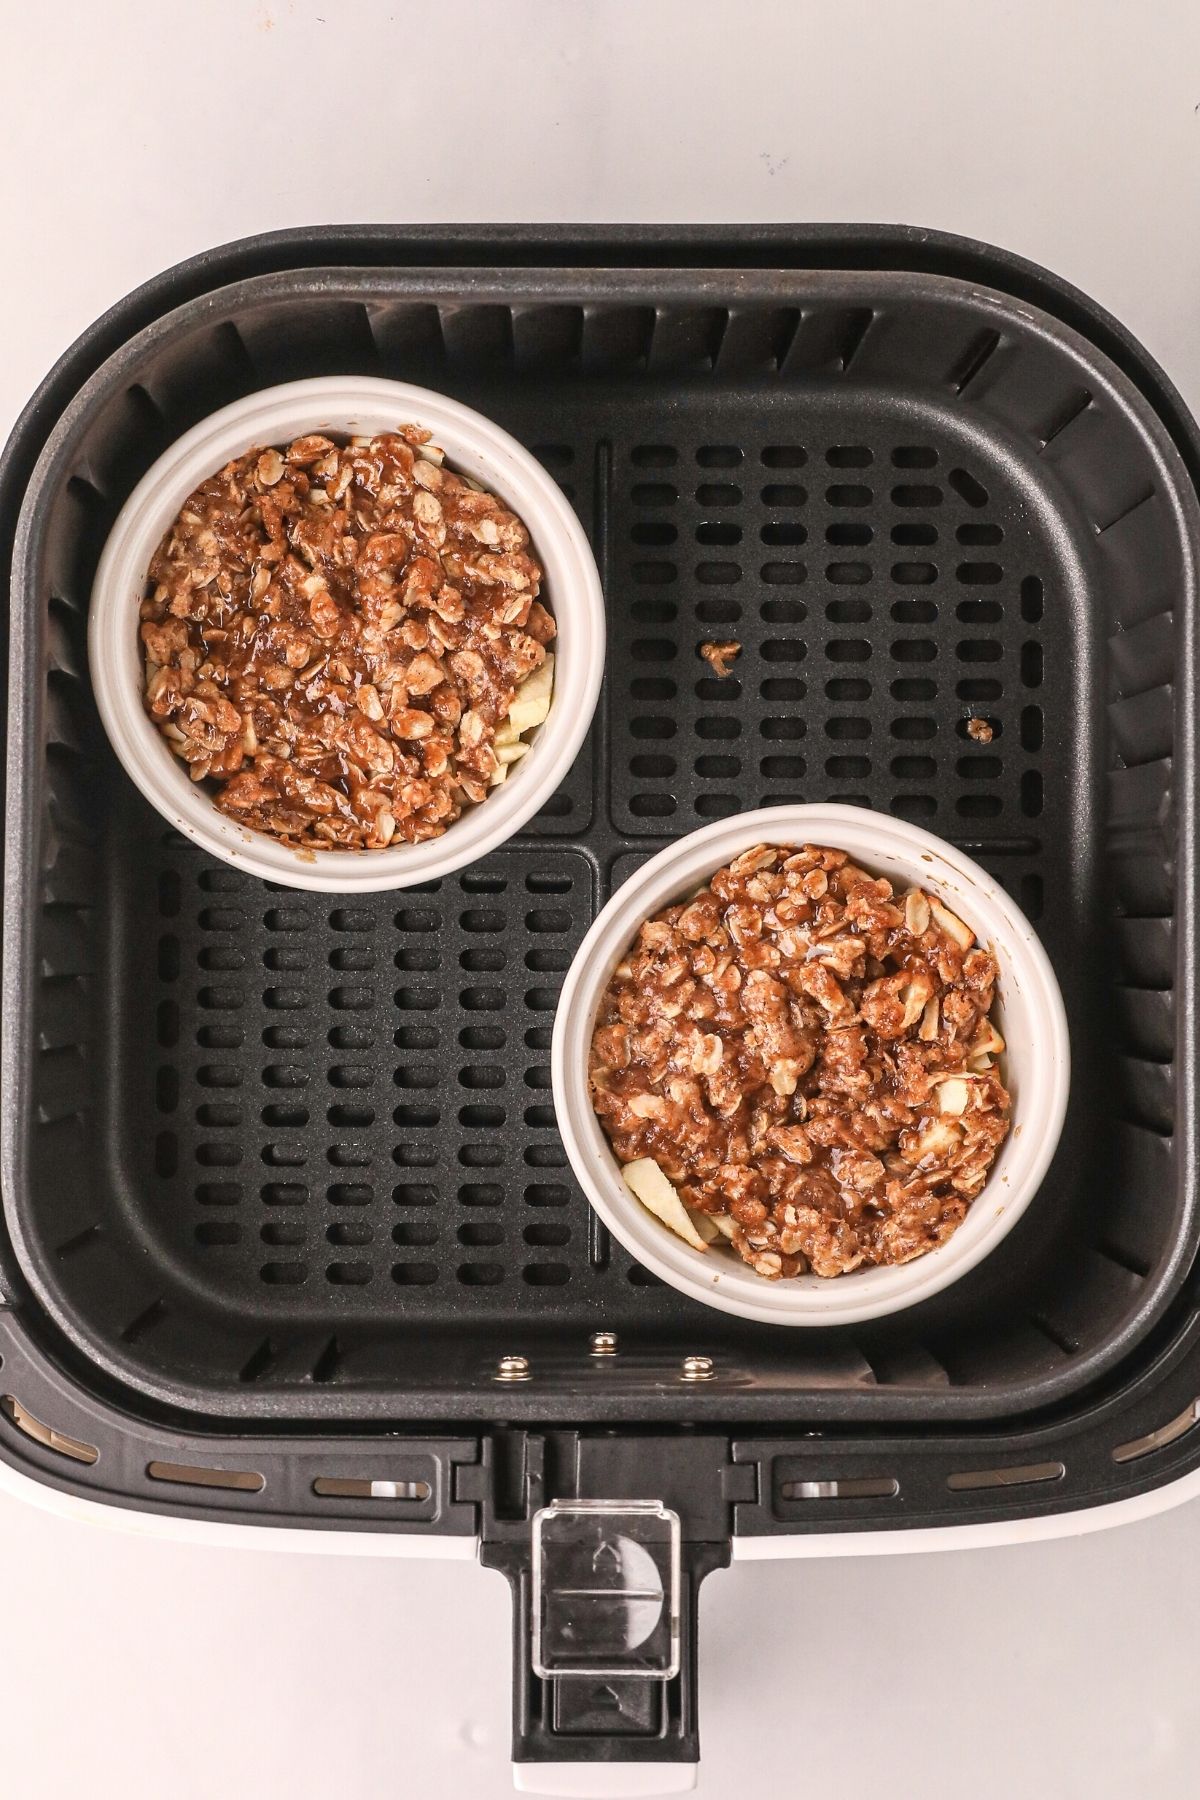 Apple crisp bowls after being cooked in the air fryer